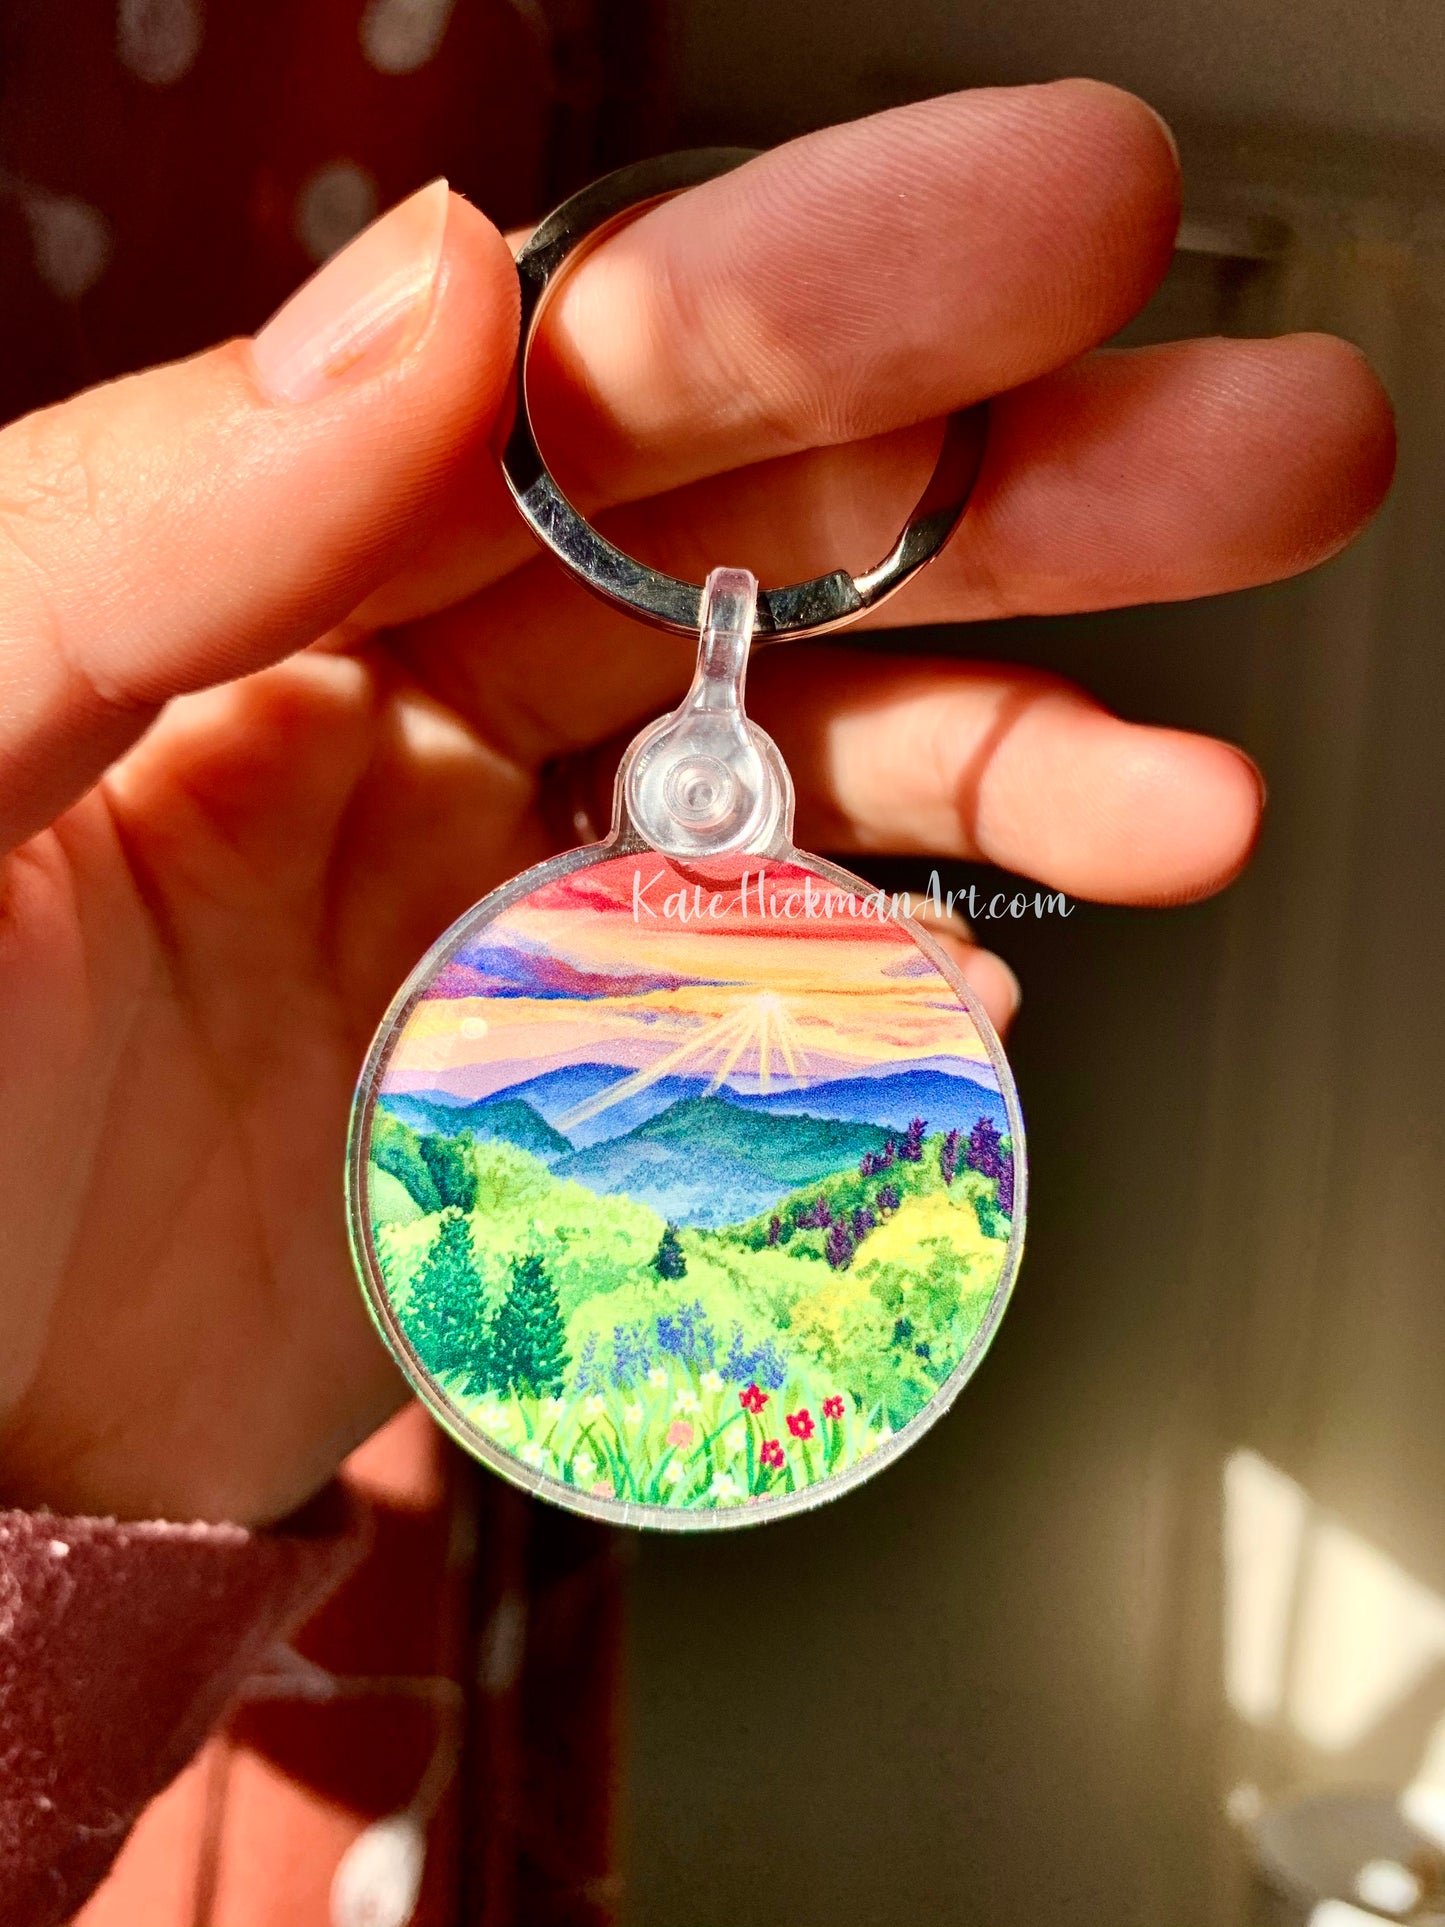 Smoky Mountains National Park Keychains